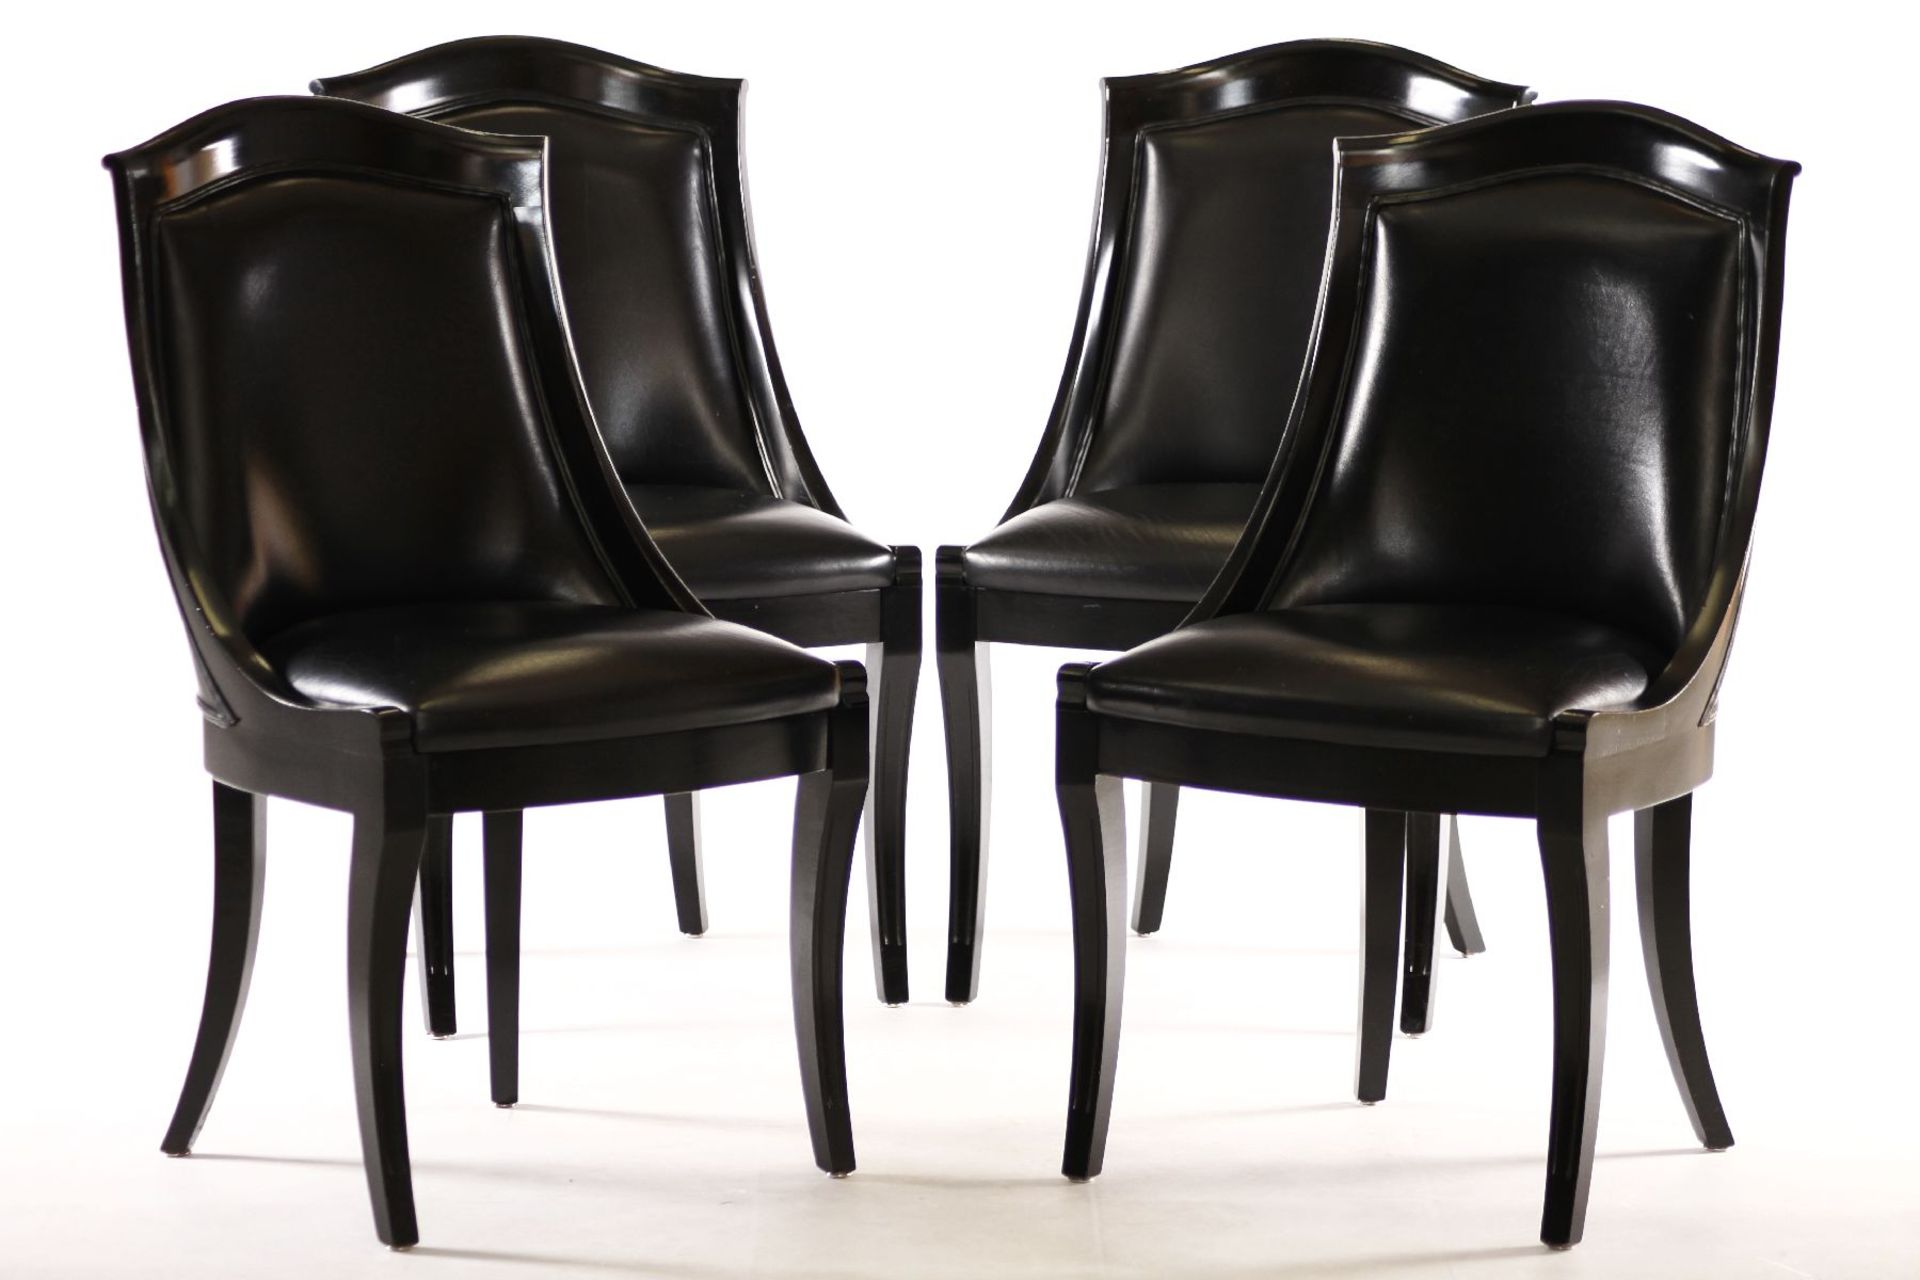 4 chairs, in Art Deco style, solid wood frames, black lacquered, black leather covers,comfortable